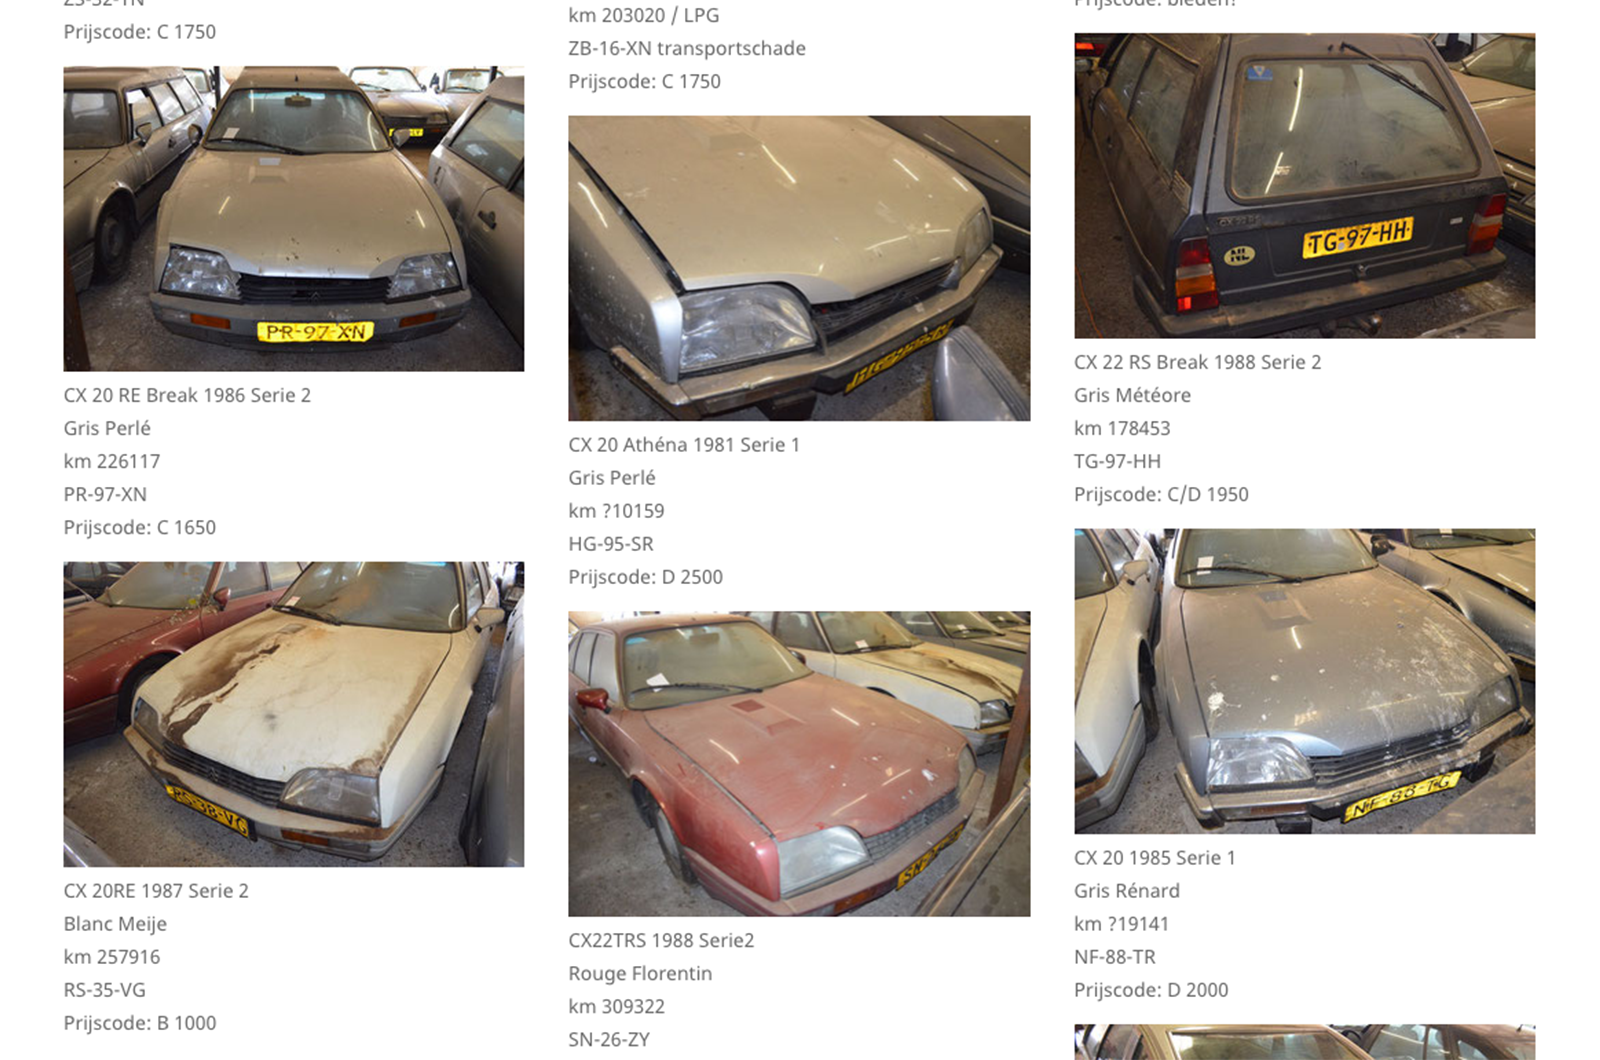 Incredible hoard of 148 Citroën CX barn-finds up for sale